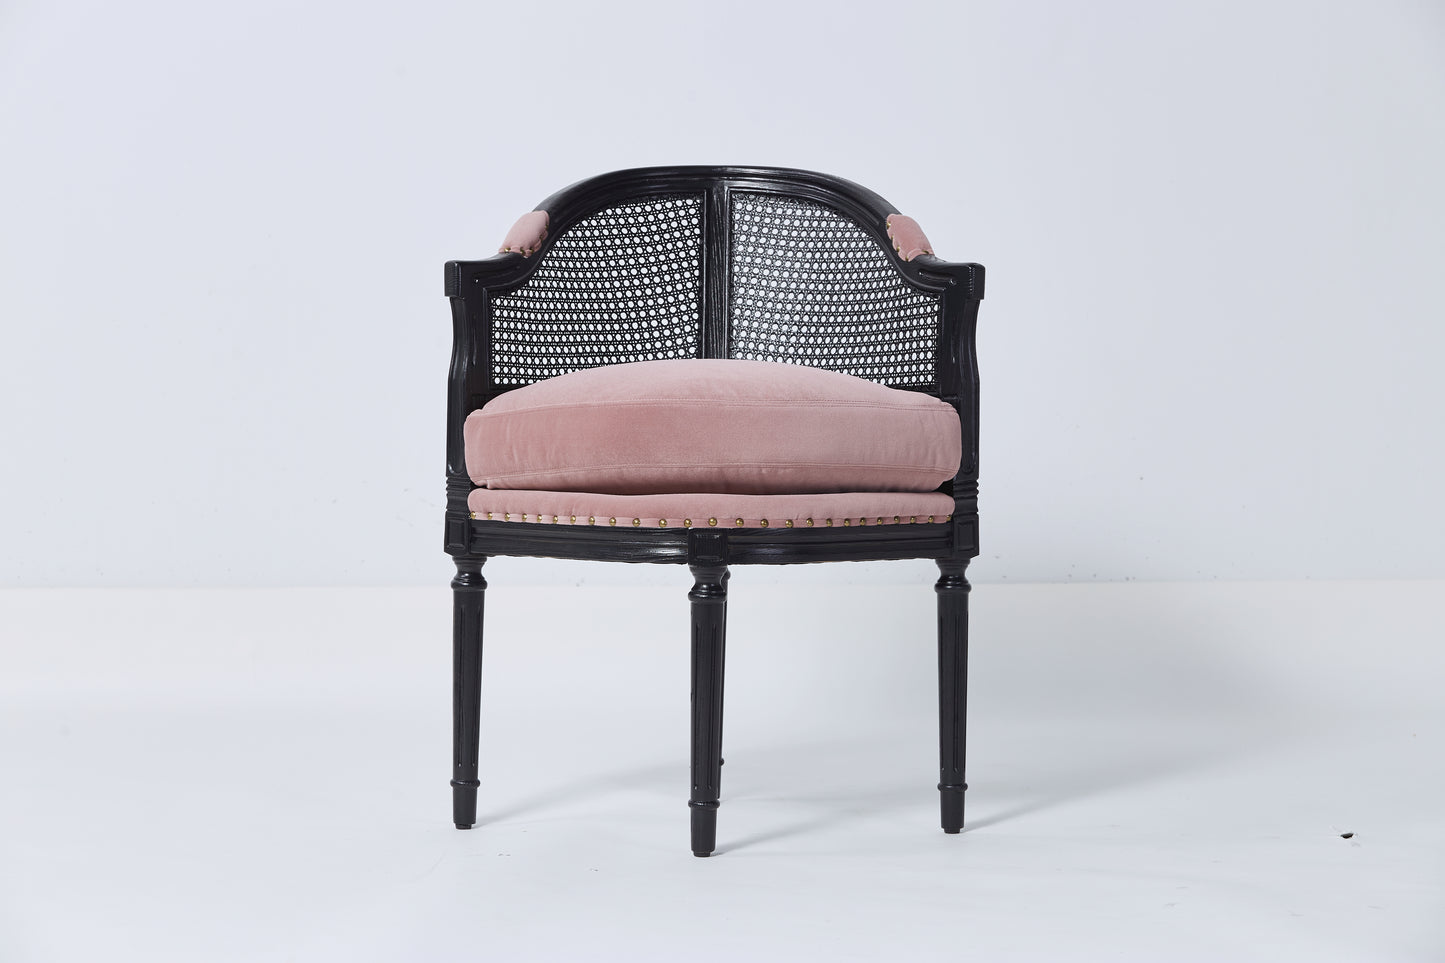 The Victoria Dining Chair